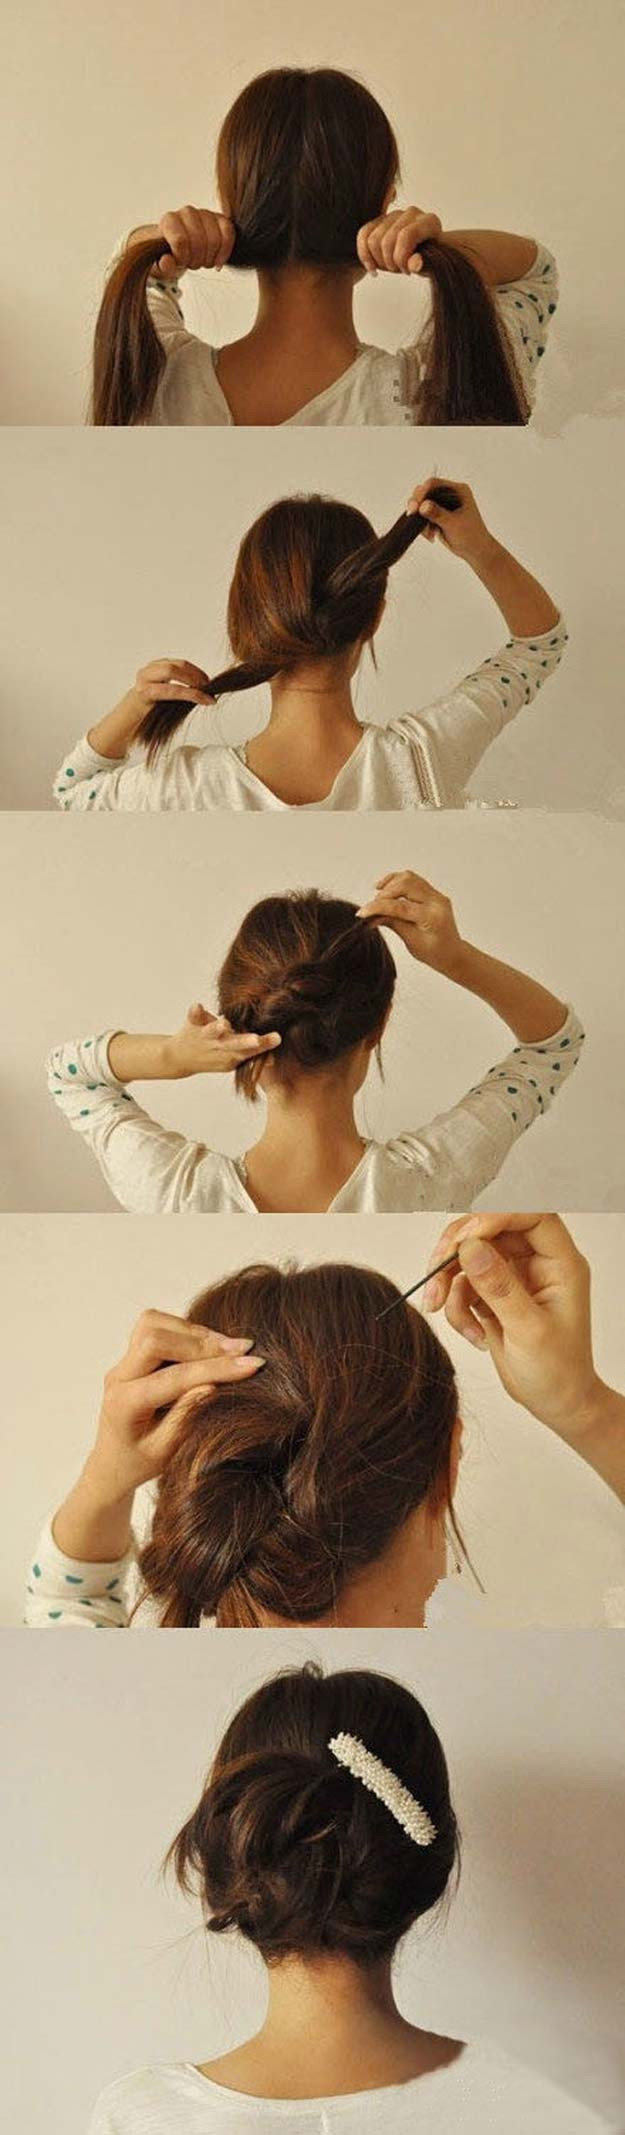 DIY Haircuts For Long Hair
 36 Best Hairstyles for Long Hair DIY Projects for Teens